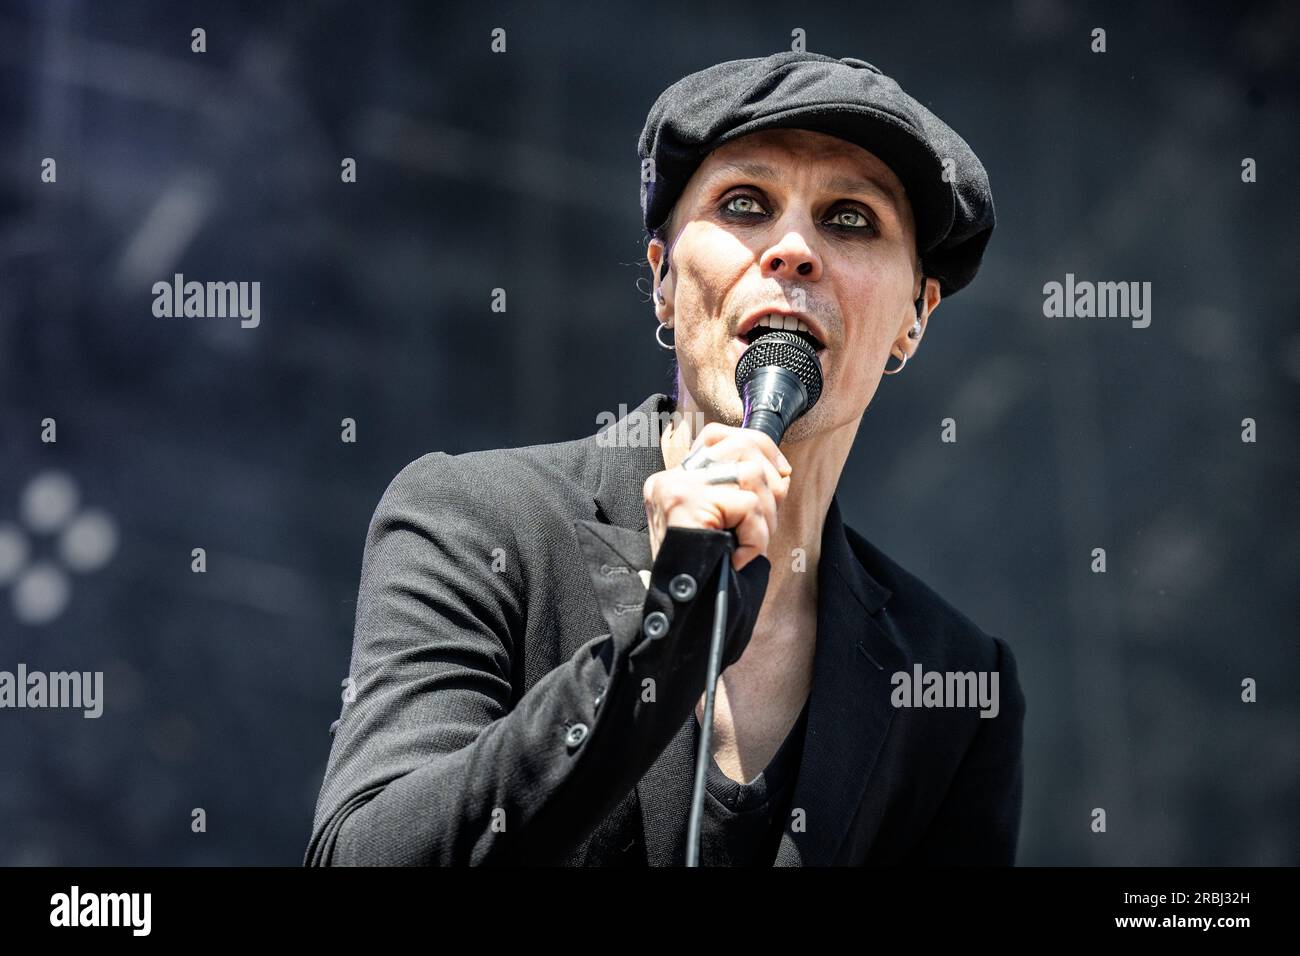 Oslo, Norway. 23rd, June 2023. The Finnish act VV performs a live concert during the Norwegian music festival Tons of Rock 2023 in Oslo. (Photo credit: Gonzales Photo - Terje Dokken). Stock Photo